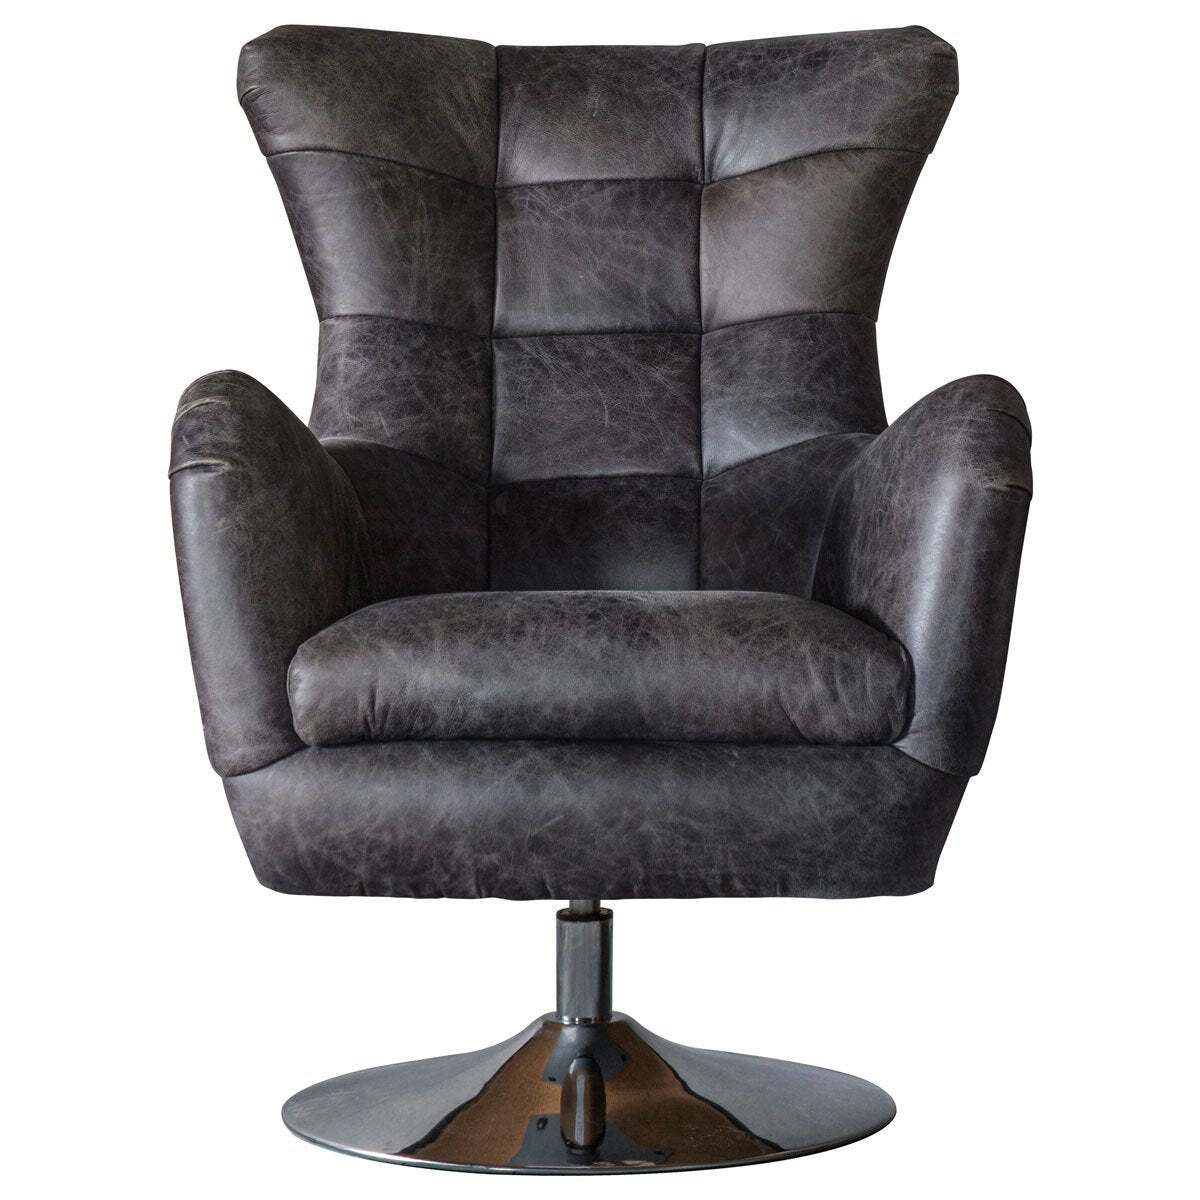 Gallery Newport Top Grain Leather Swivel Chair, Ebony - Signature Retail Stores